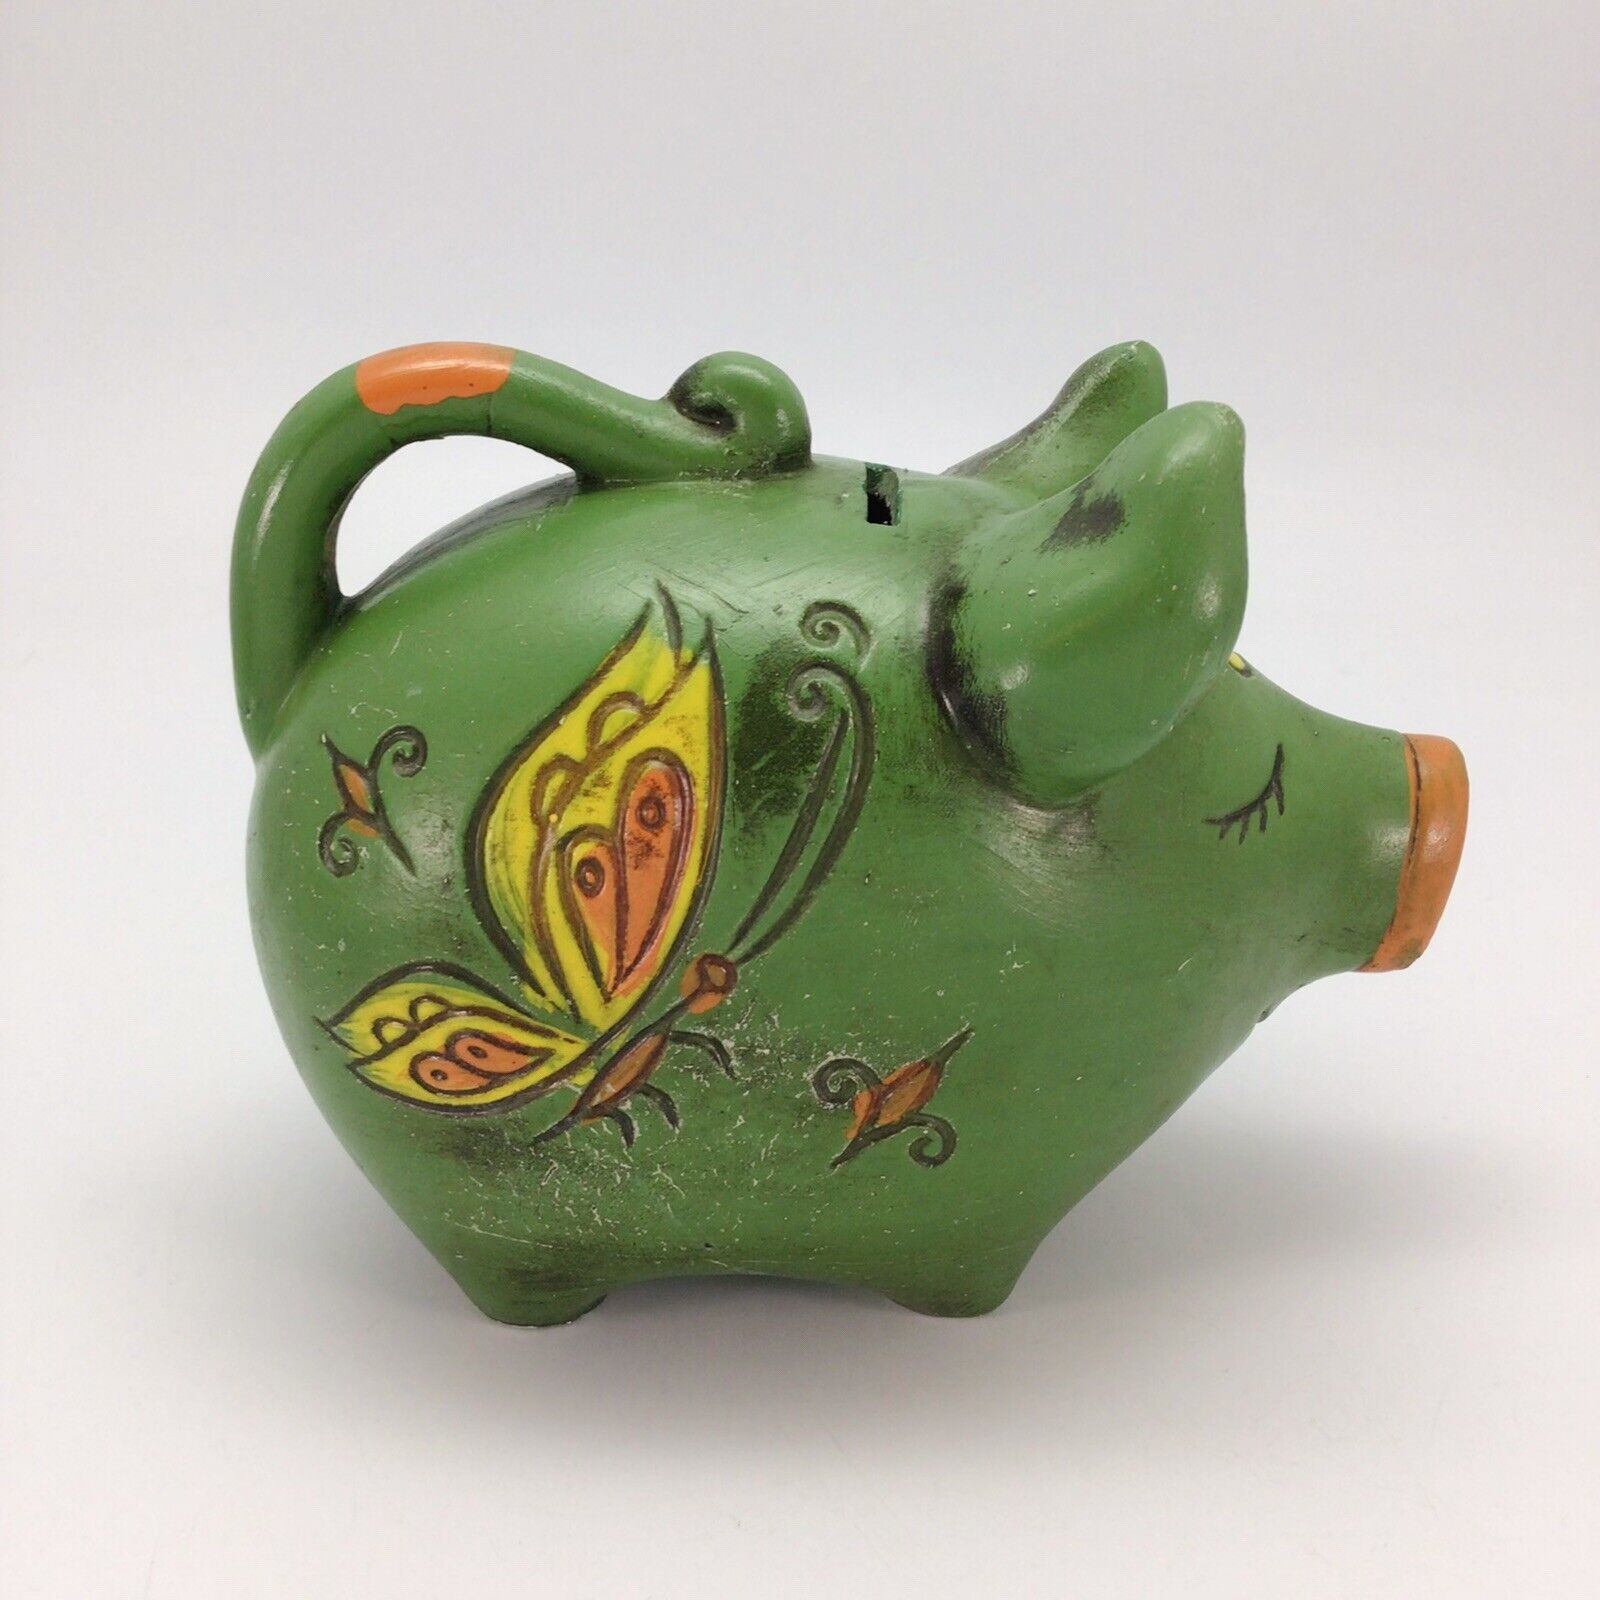 Ceramic Piggy Coin Bank Green Yellow Orange Butterfly Pig 1960’s Vintage